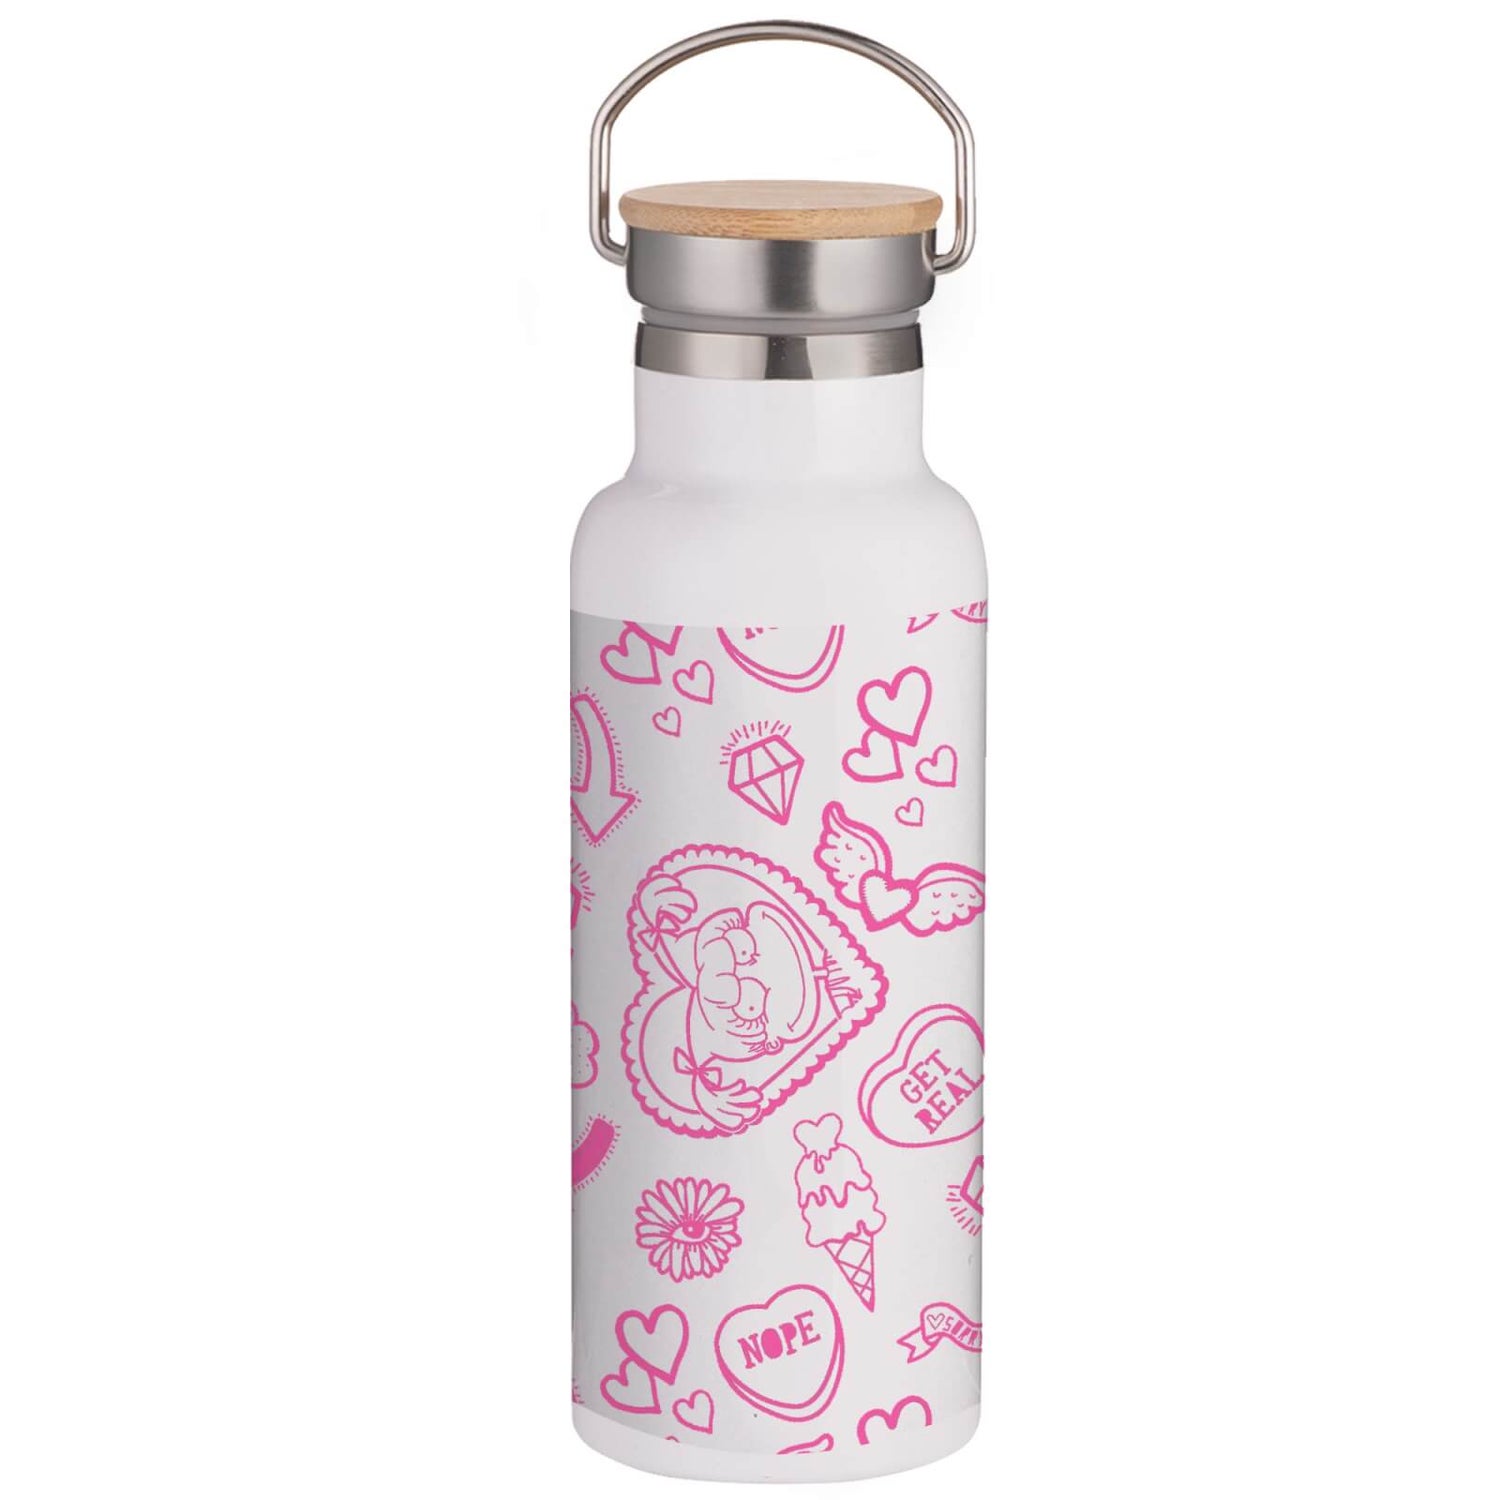 Rugrats Thermo Flask Portable Insulated Water Bottle - Steel